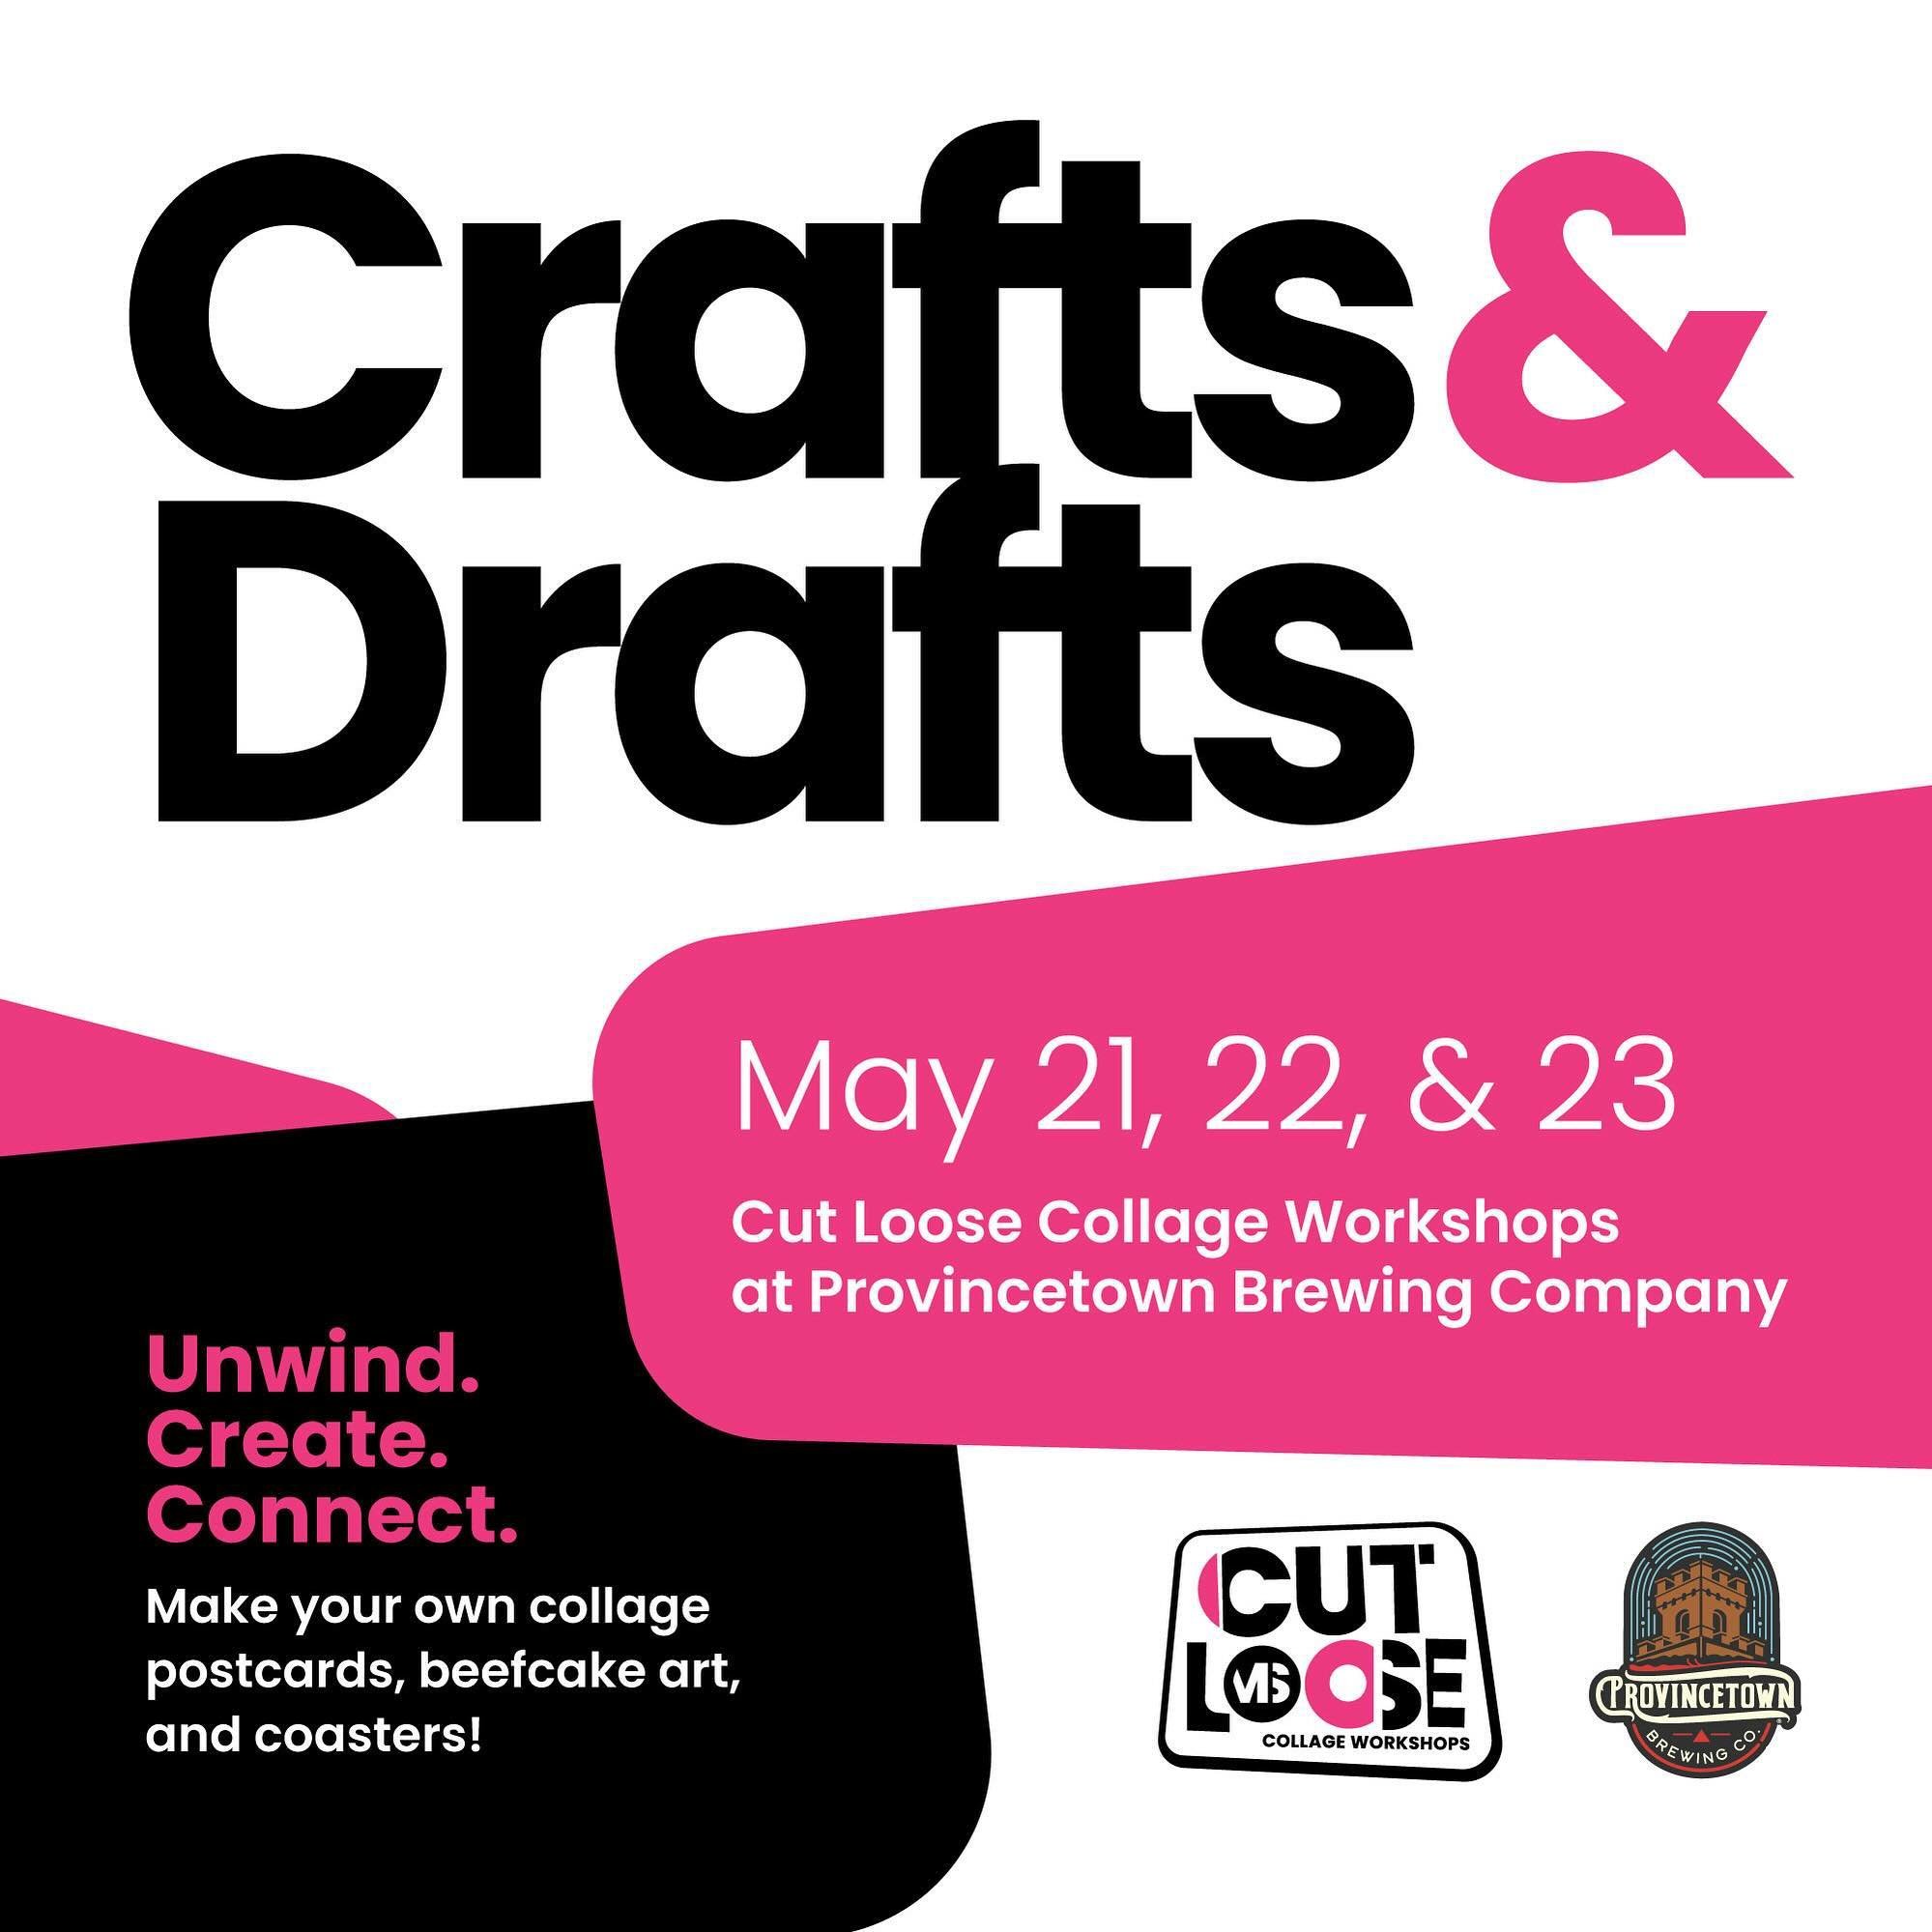 For the first time in Provincetown, we present to you Crafts &amp; Drafts! This fun and creative collage workshop, led by artist @michaelsjostedt, will take place over three days from May 21-23. Learn how to unleash your creativity through the medium